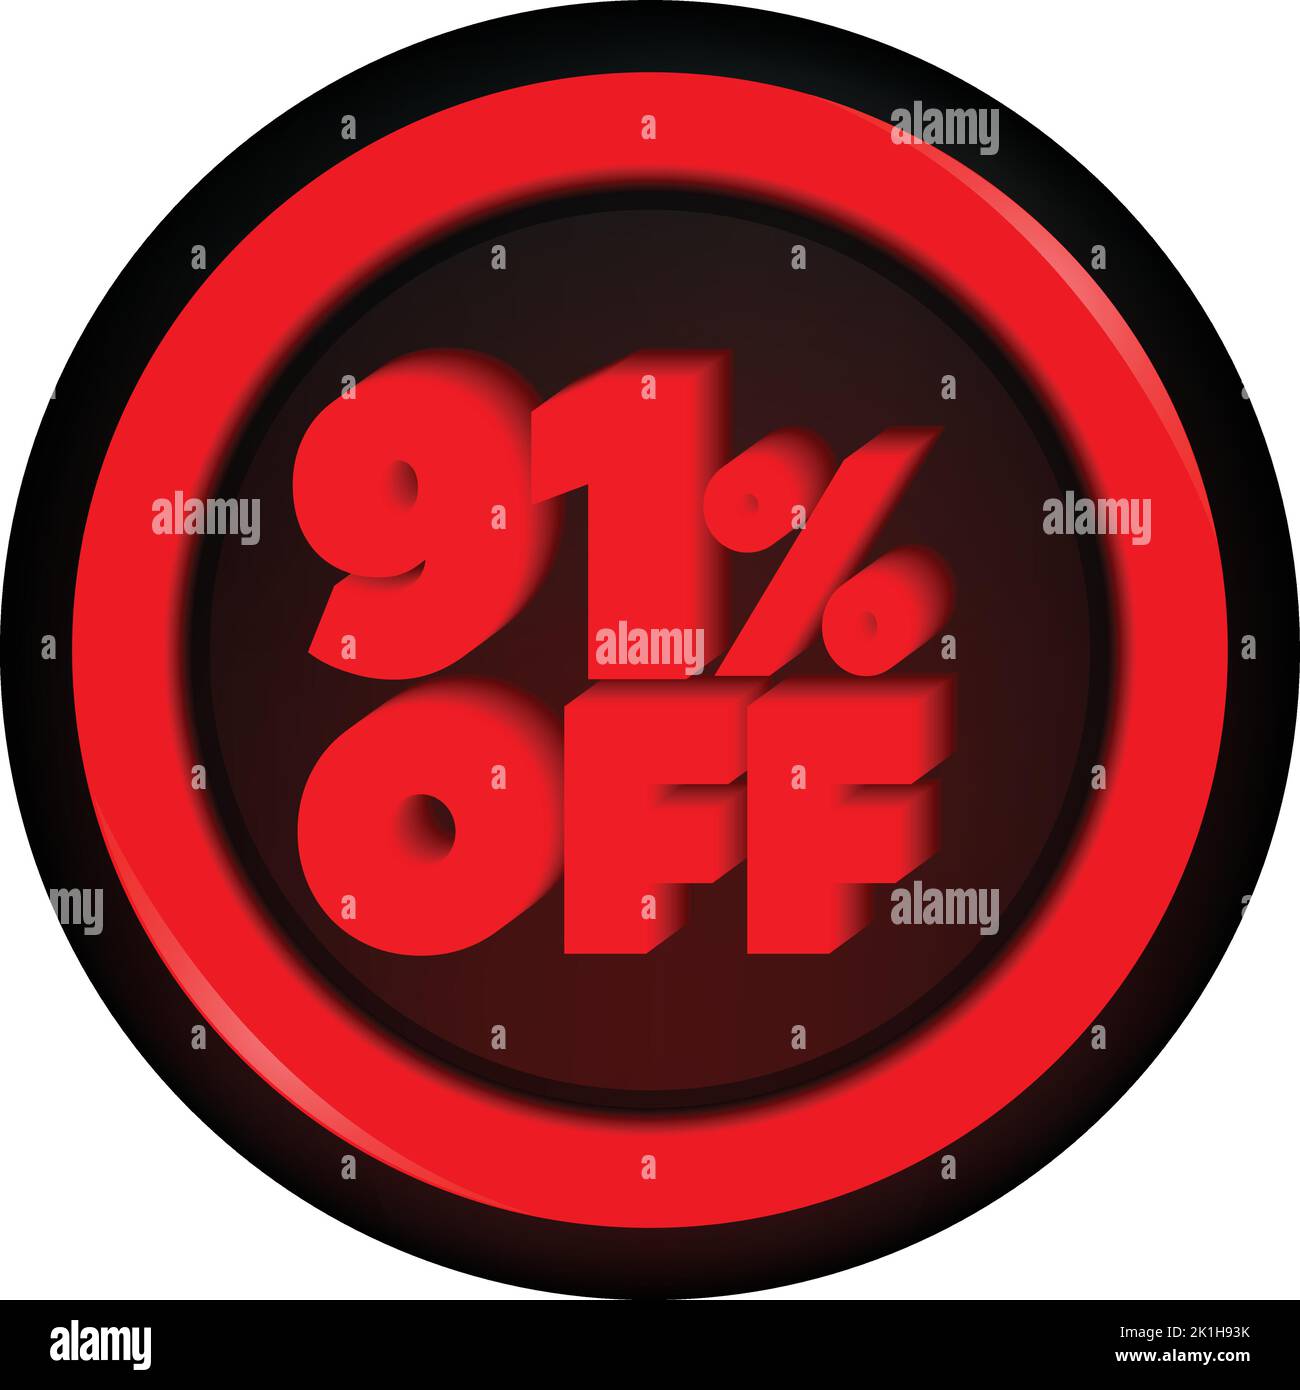 TAG 91 PERCENT DISCOUNT BUTTON BLACK FRIDAY PROMOTION FOR BIG SALES Stock Vector